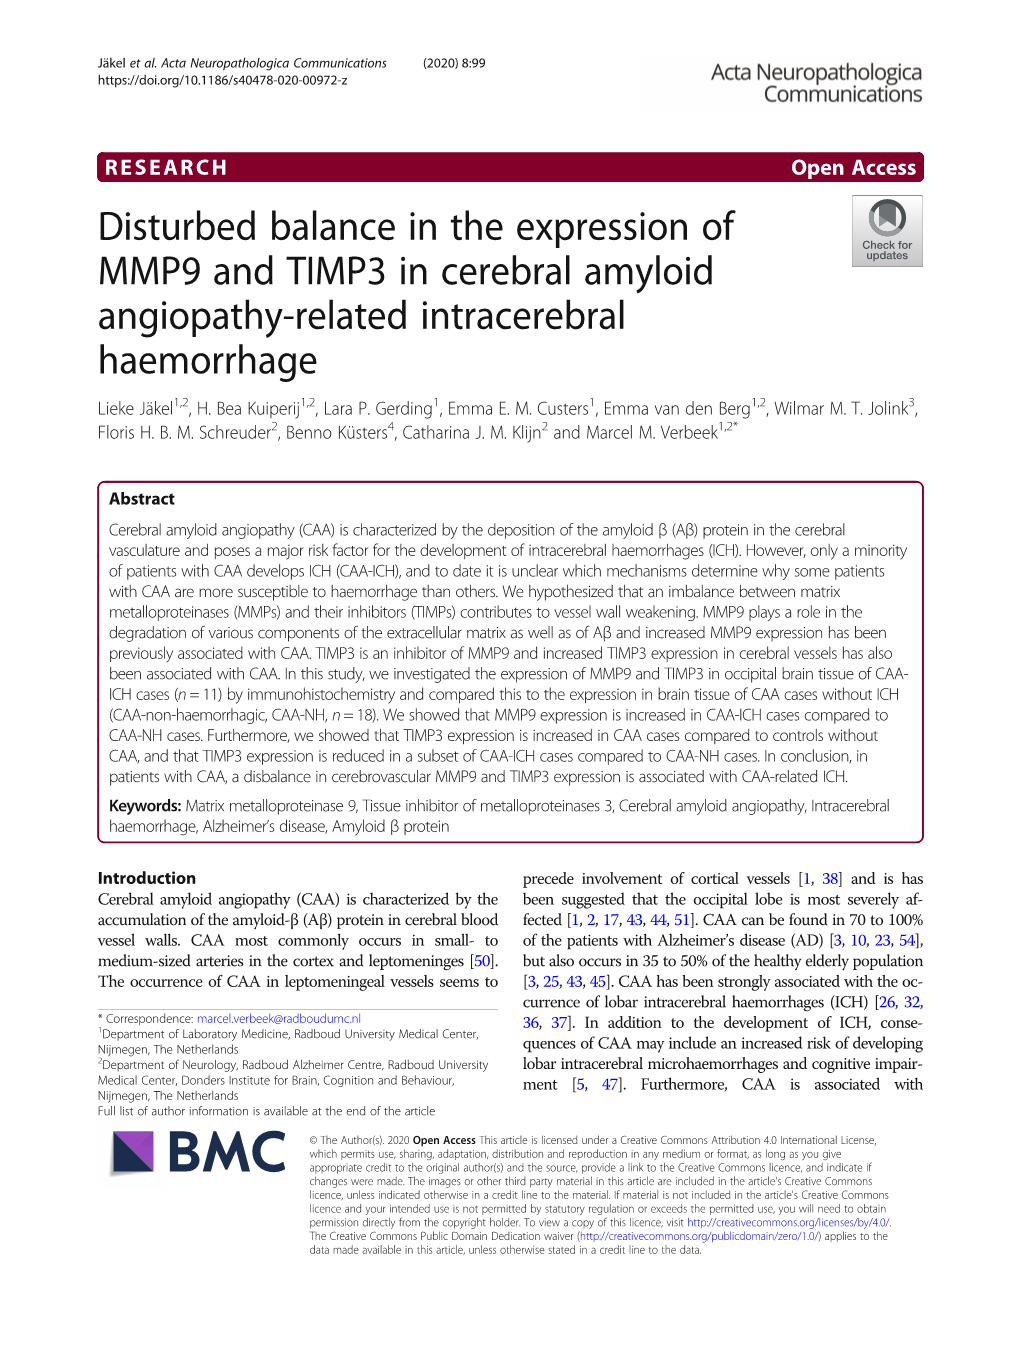 Disturbed Balance in the Expression of MMP9 and TIMP3 in Cerebral Amyloid Angiopathy-Related Intracerebral Haemorrhage Lieke Jäkel1,2, H